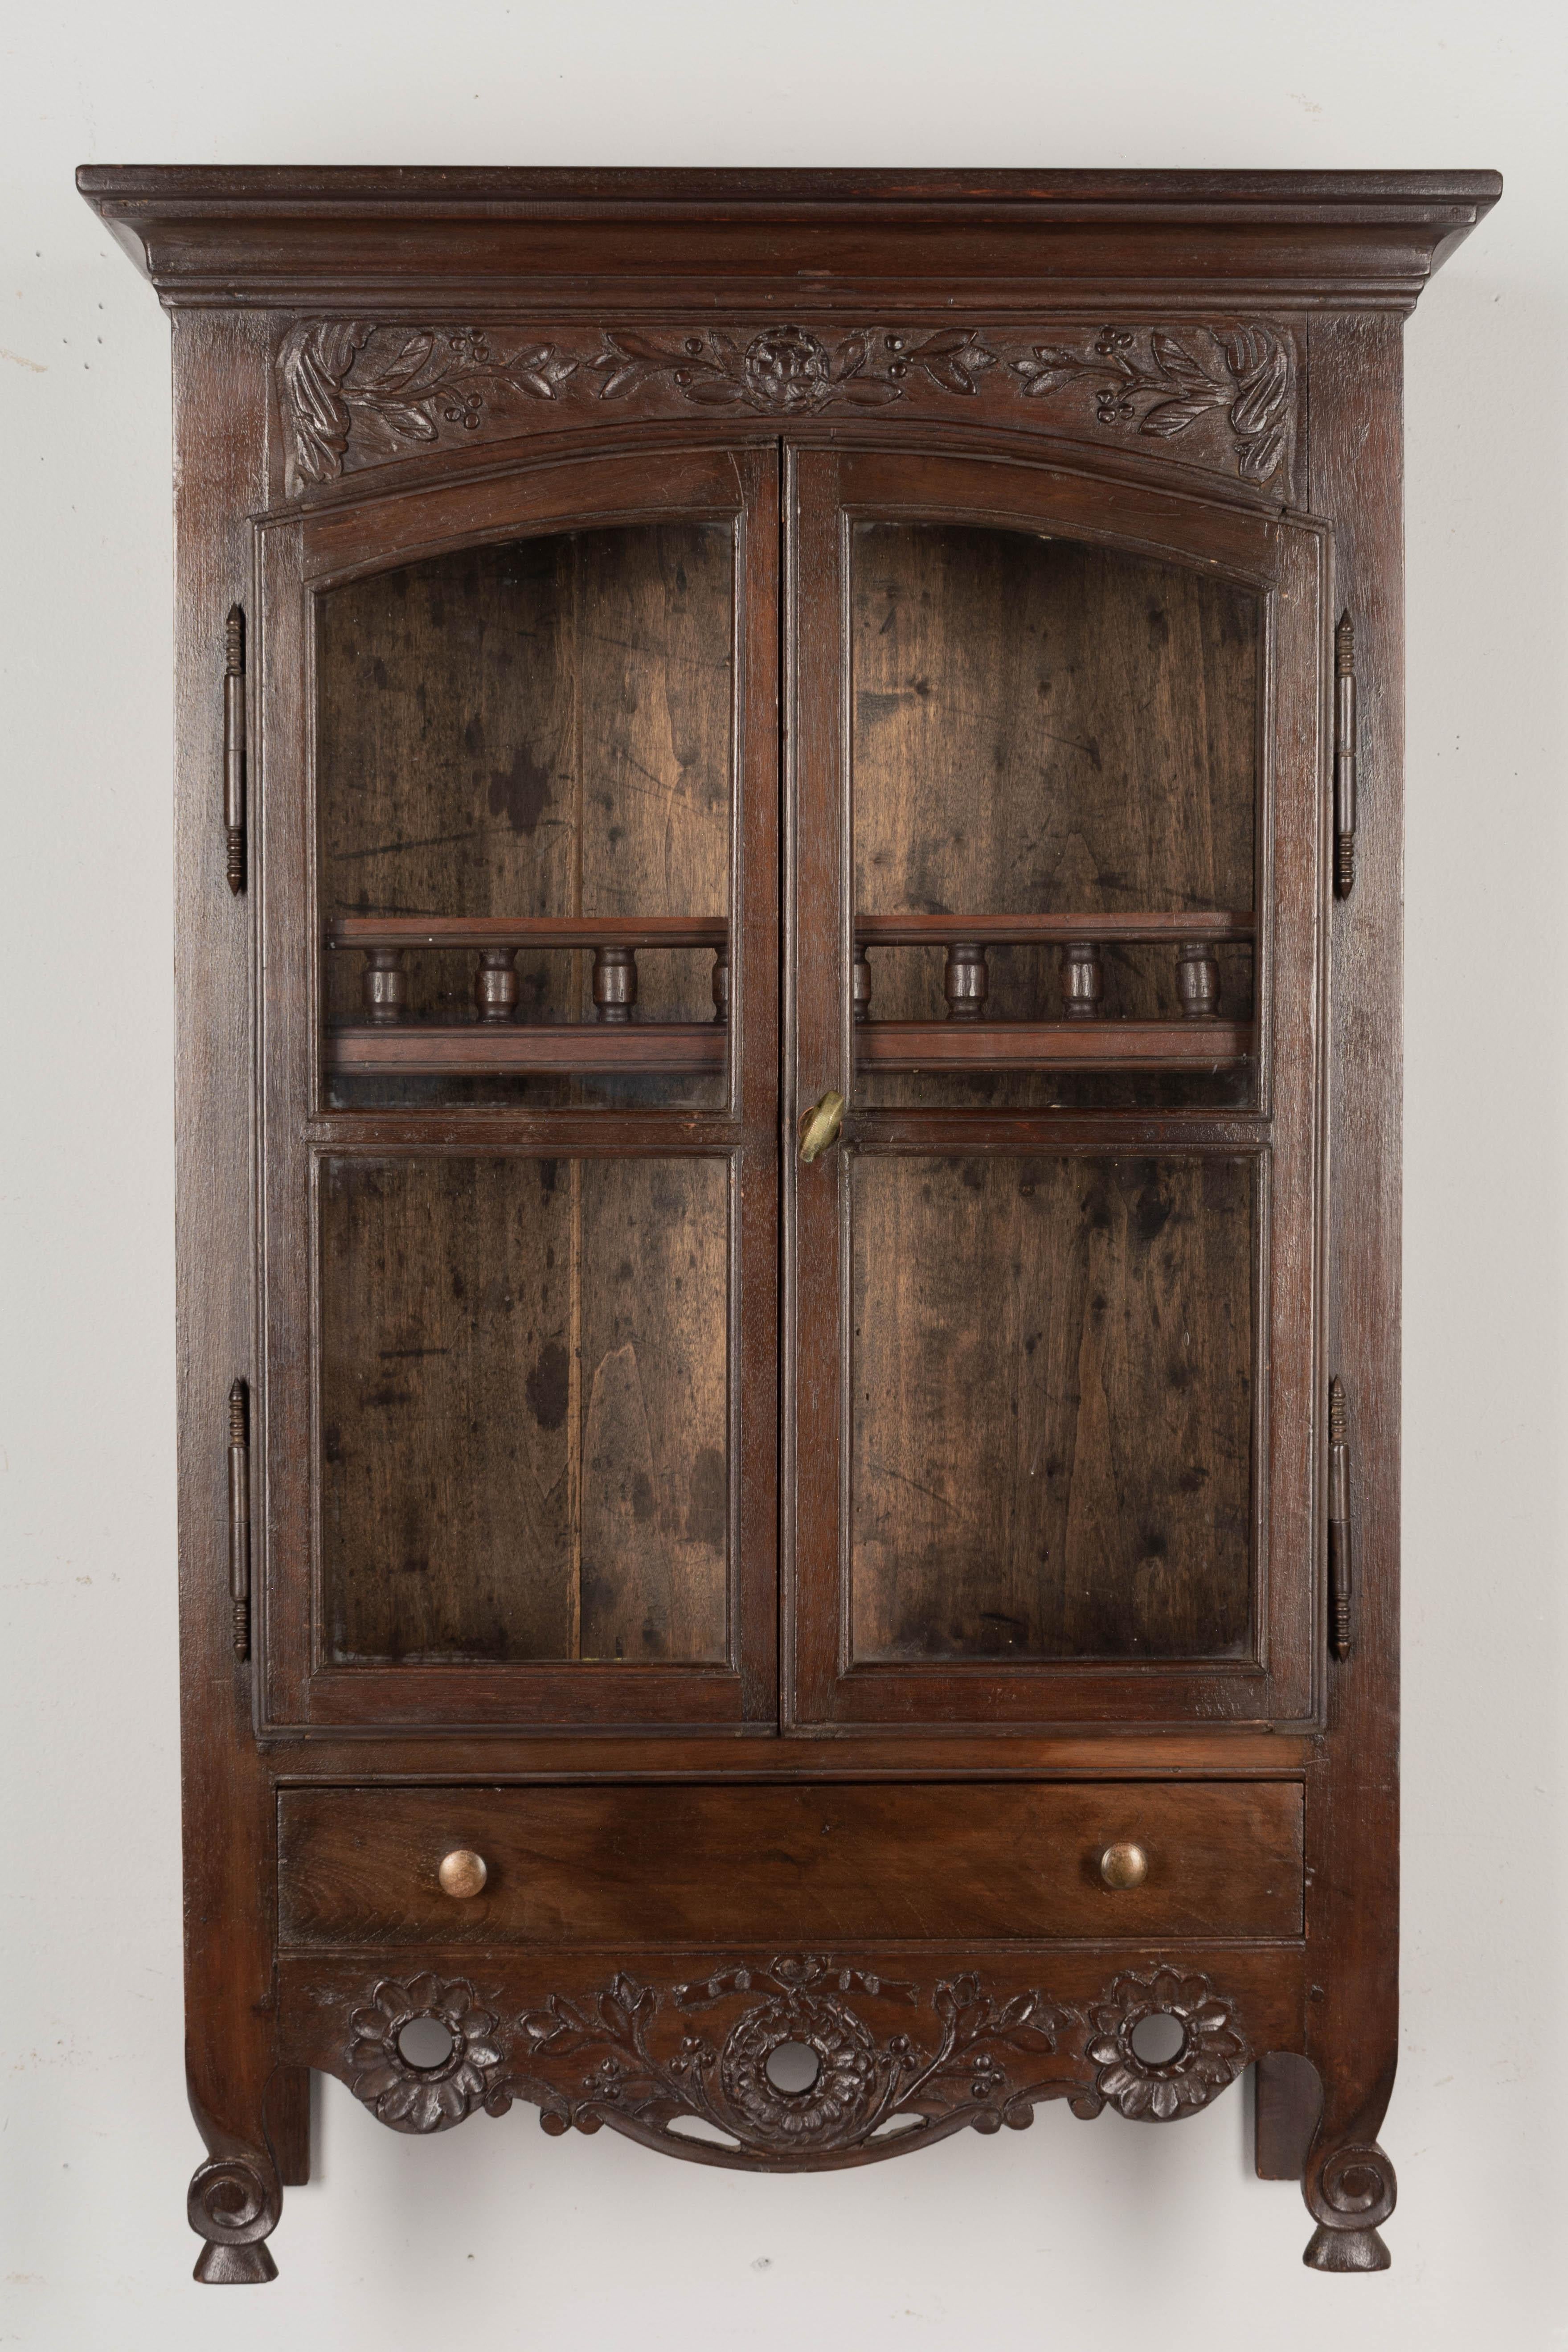 A Louis XV style French Provençal vitrine, or wall display cabinet made of solid walnut with glass paned doors and a dovetailed drawer. Interior has one shelf with decorative spindle gallery. Hand-carved details at the top and a pierced carved